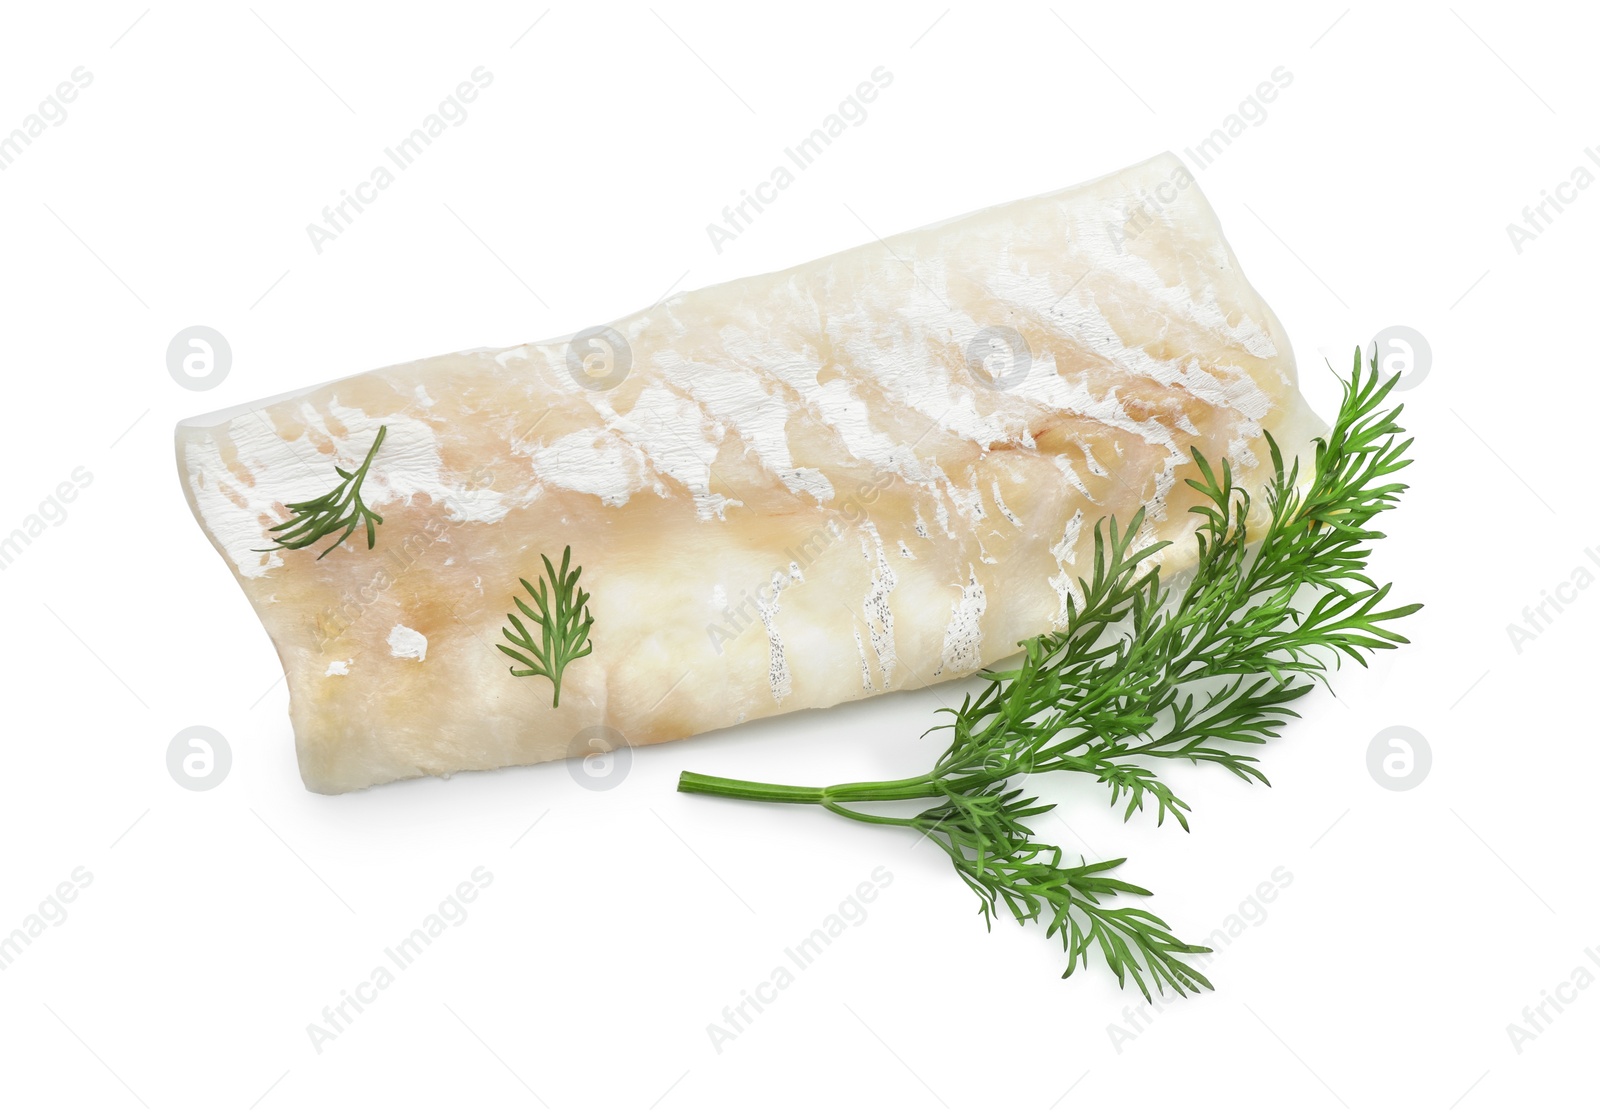 Photo of Fresh raw cod fillet with dill isolated on white